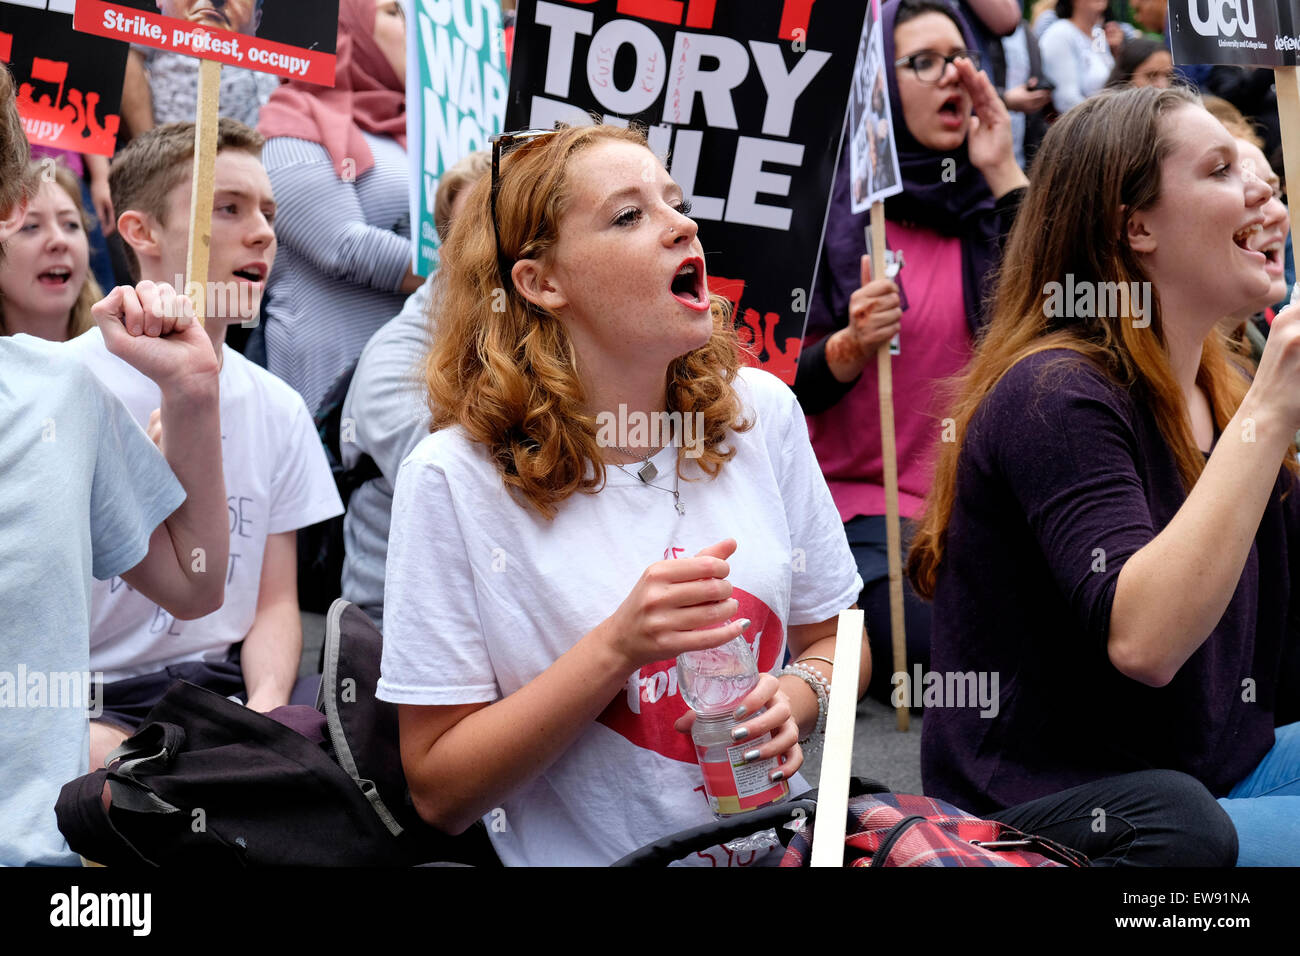 Young people protest outside Downing street, against austerity Stock Photo